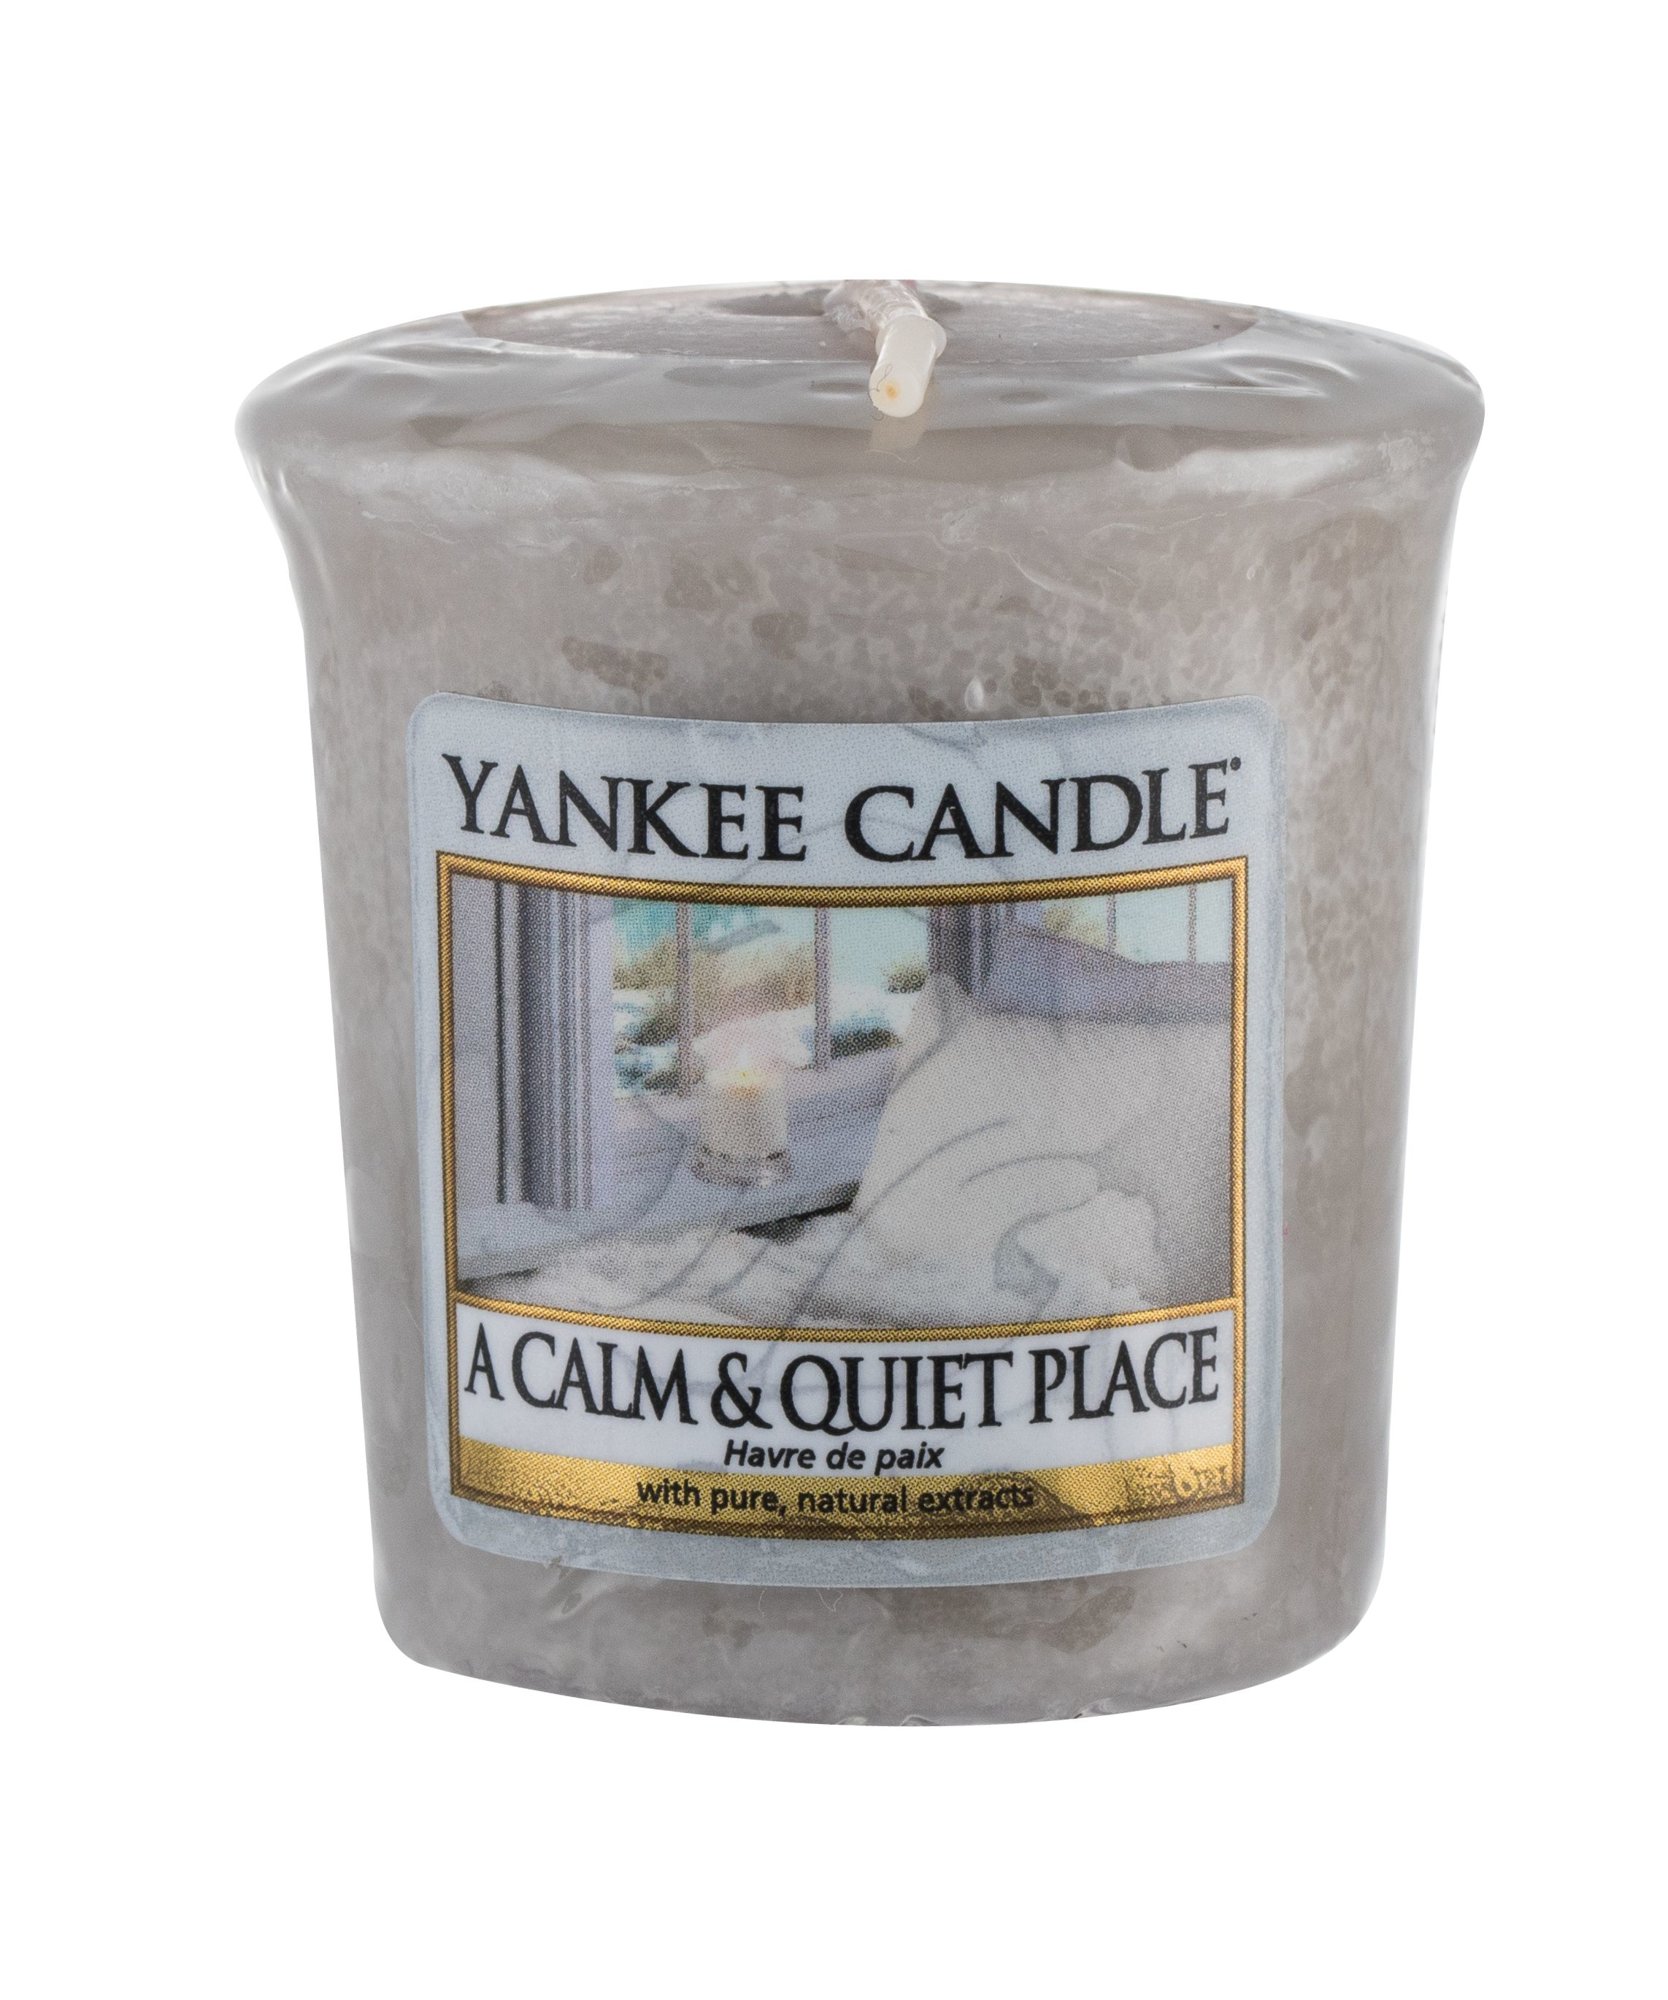 Yankee Candle A Calm & Quiet Place 49g Kvepalai Unisex Scented Candle